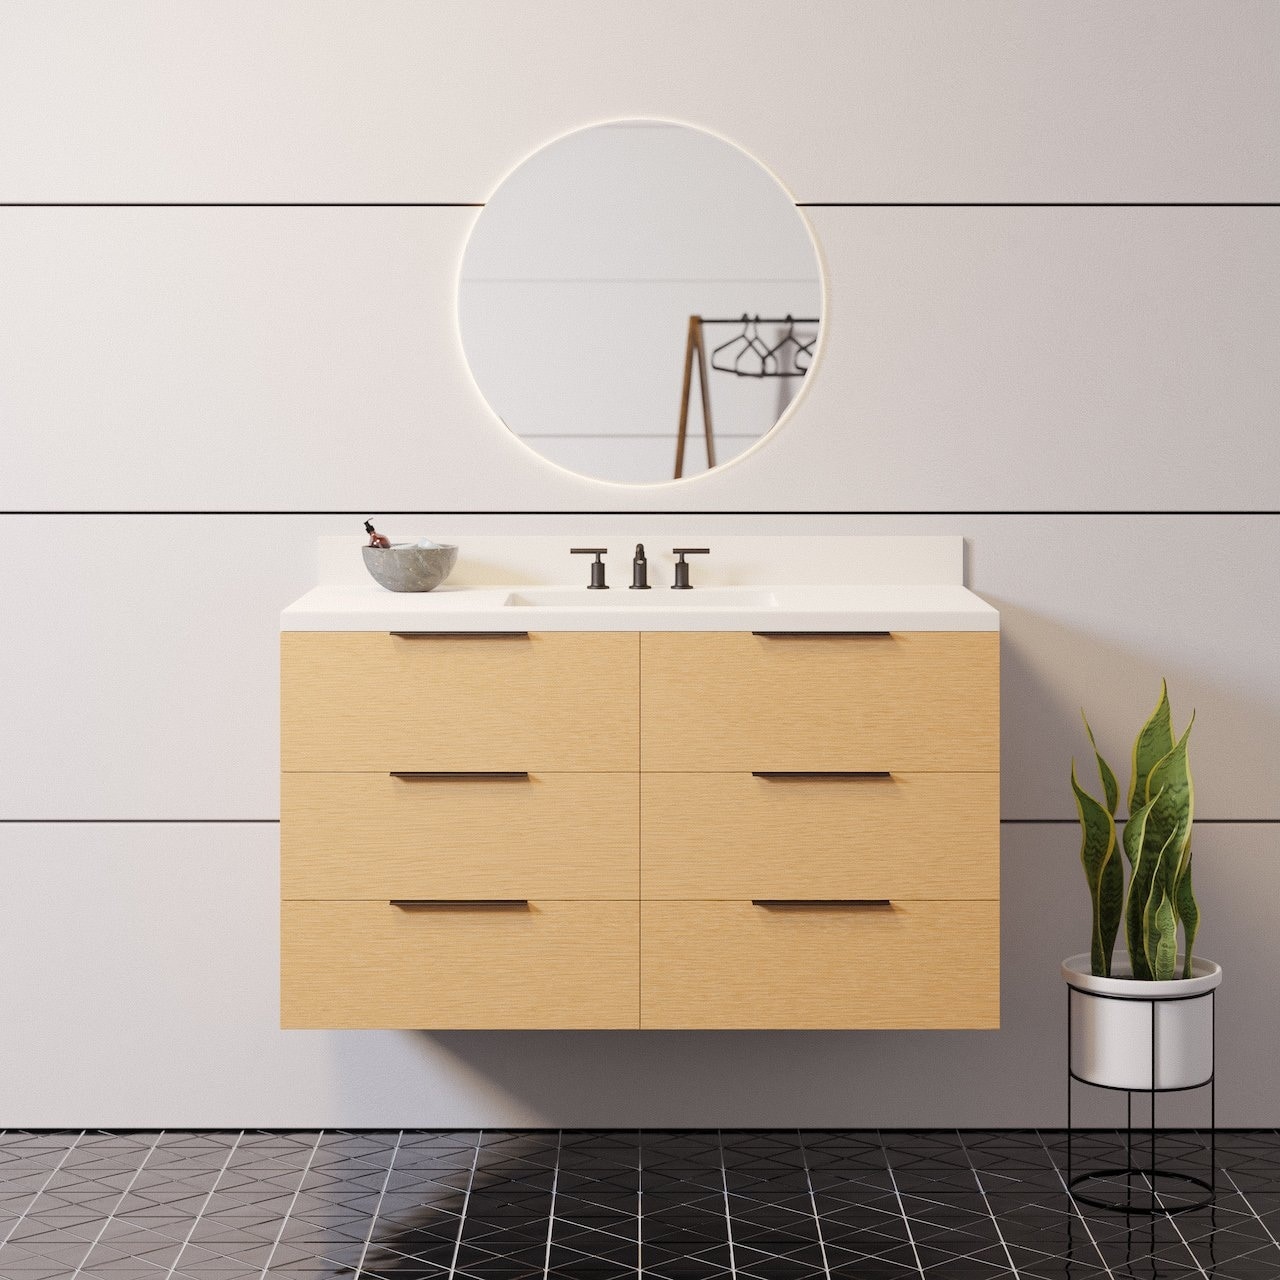 https://ak1.ostkcdn.com/images/products/is/images/direct/603ab0d888ef1aac3cfca5adf070cd8ab4f0cf5f/KitchenBathCollection-Oslo-42%22-Floating-Wall-Mounted-Bathroom-Vanity-with-Matte-White-Top.jpg